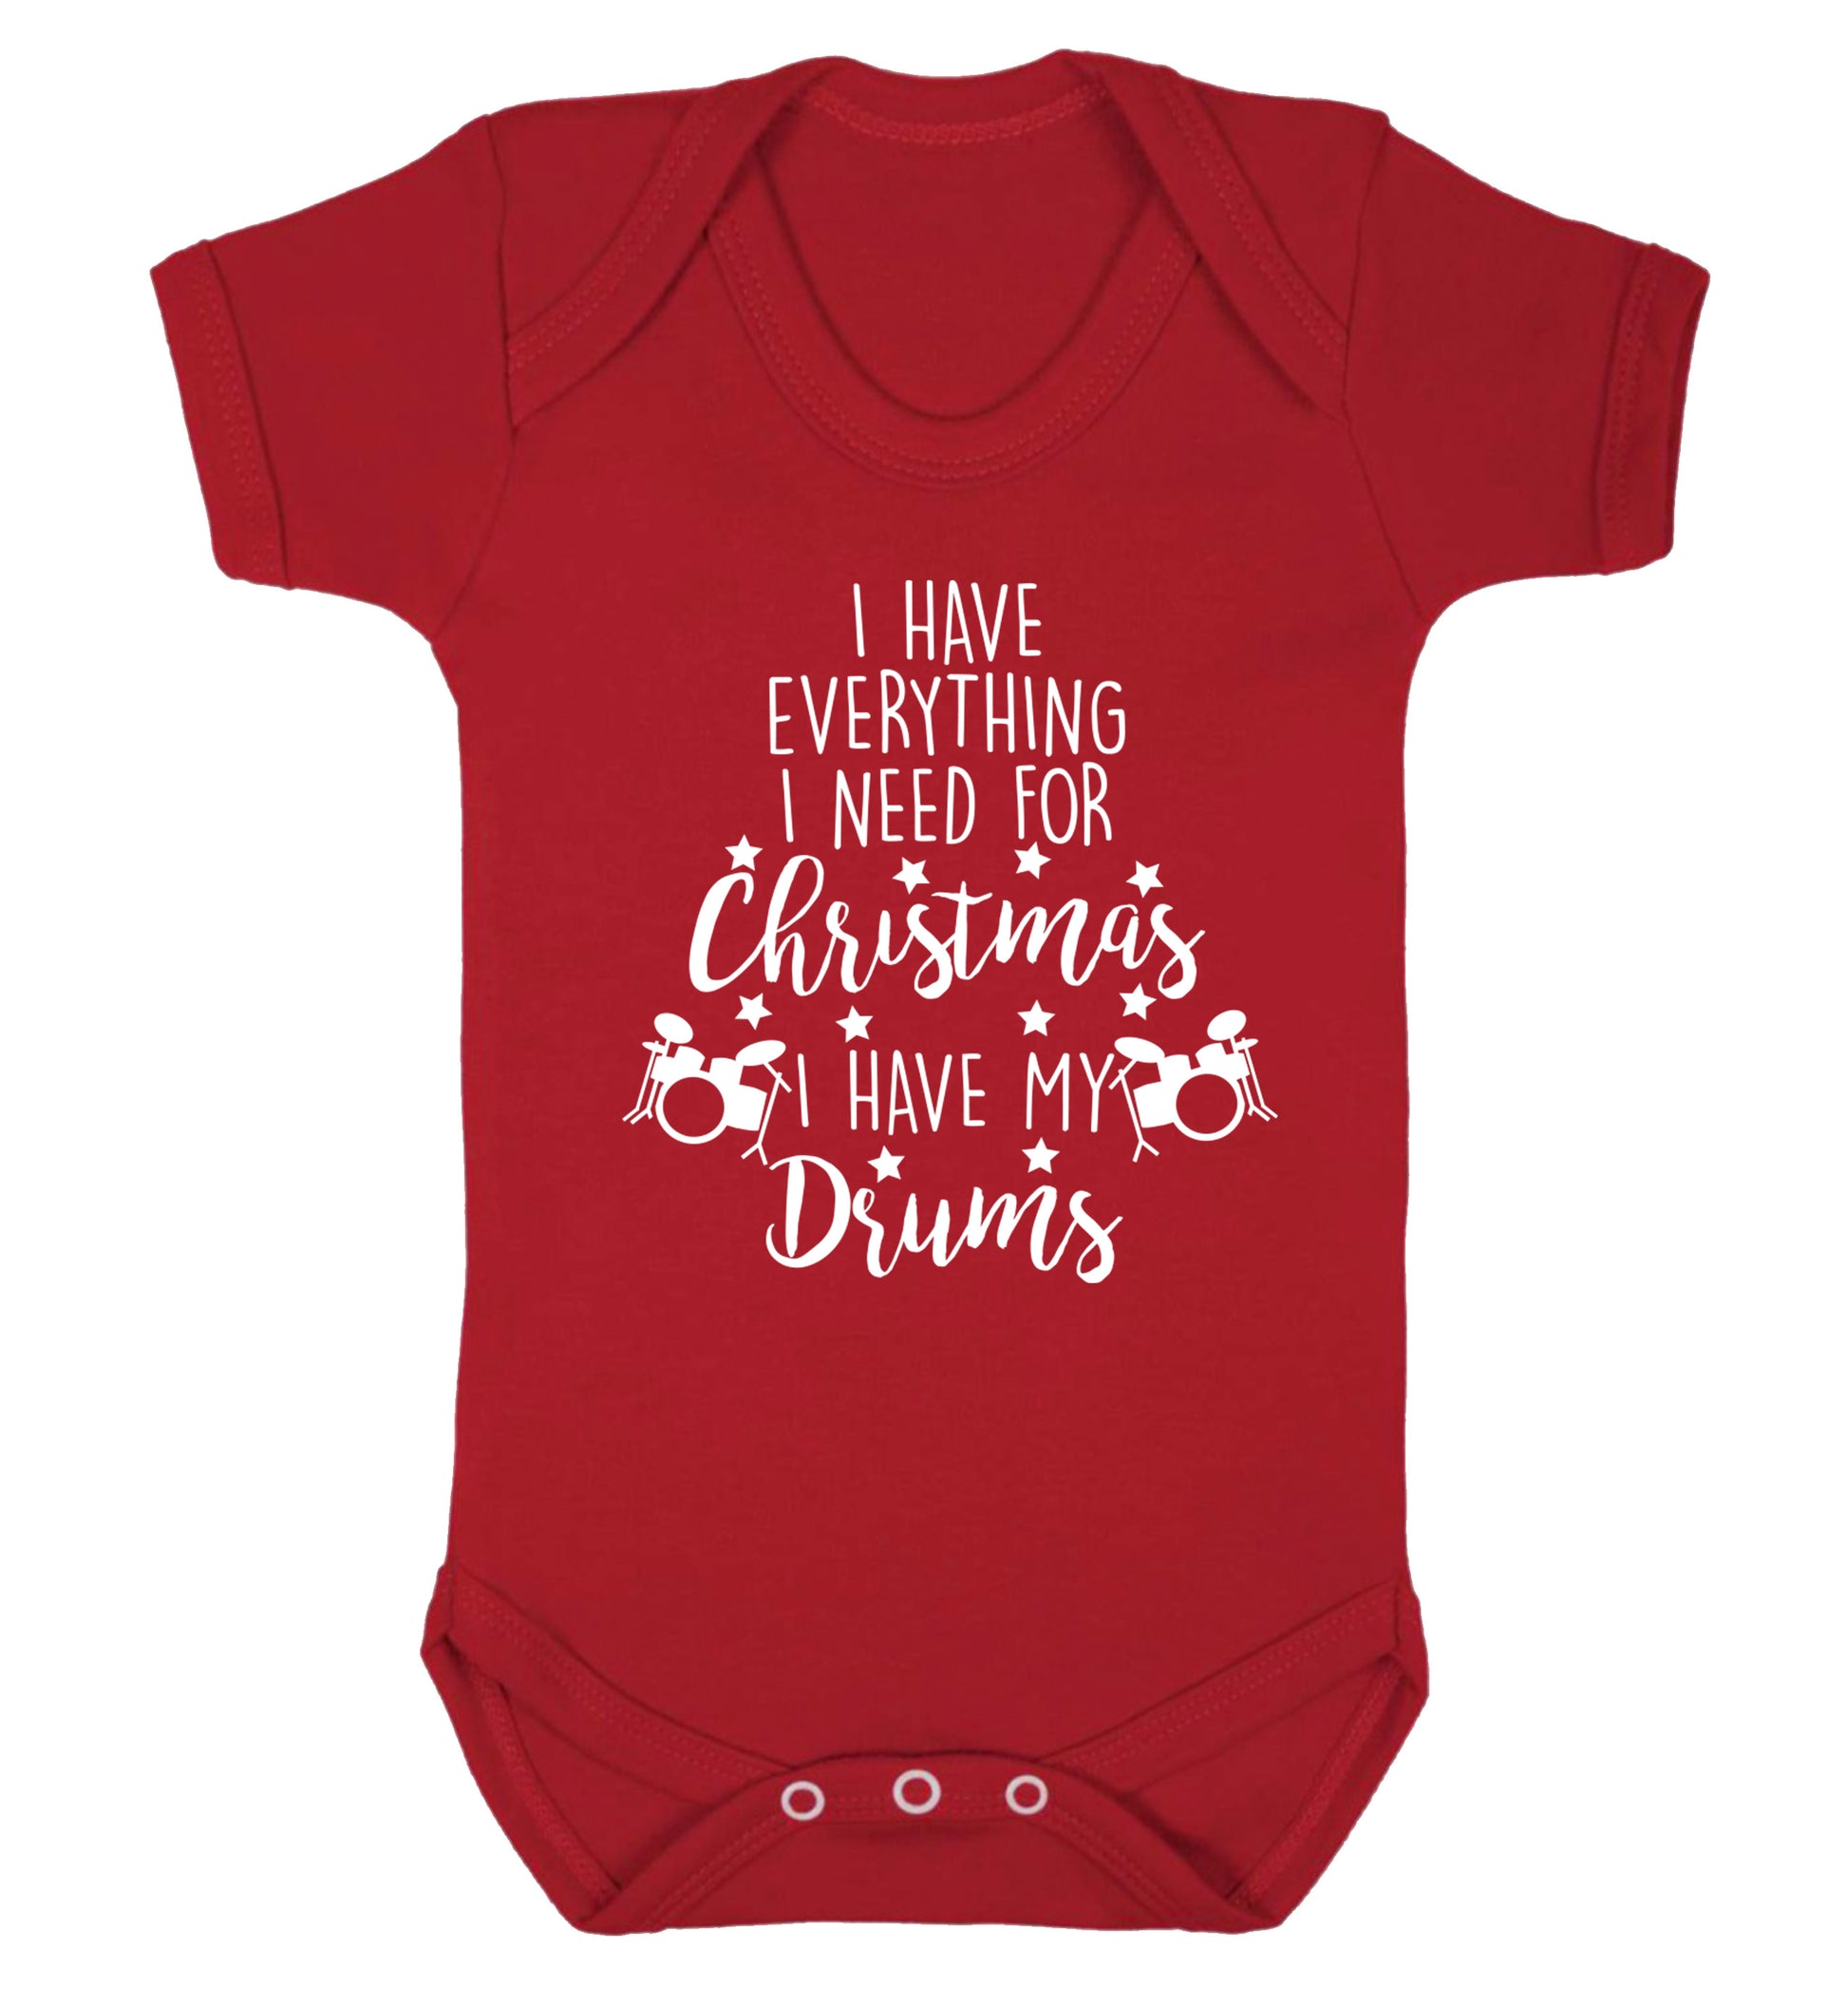 I have everything I need for Christmas I have my drums! Baby Vest red 18-24 months